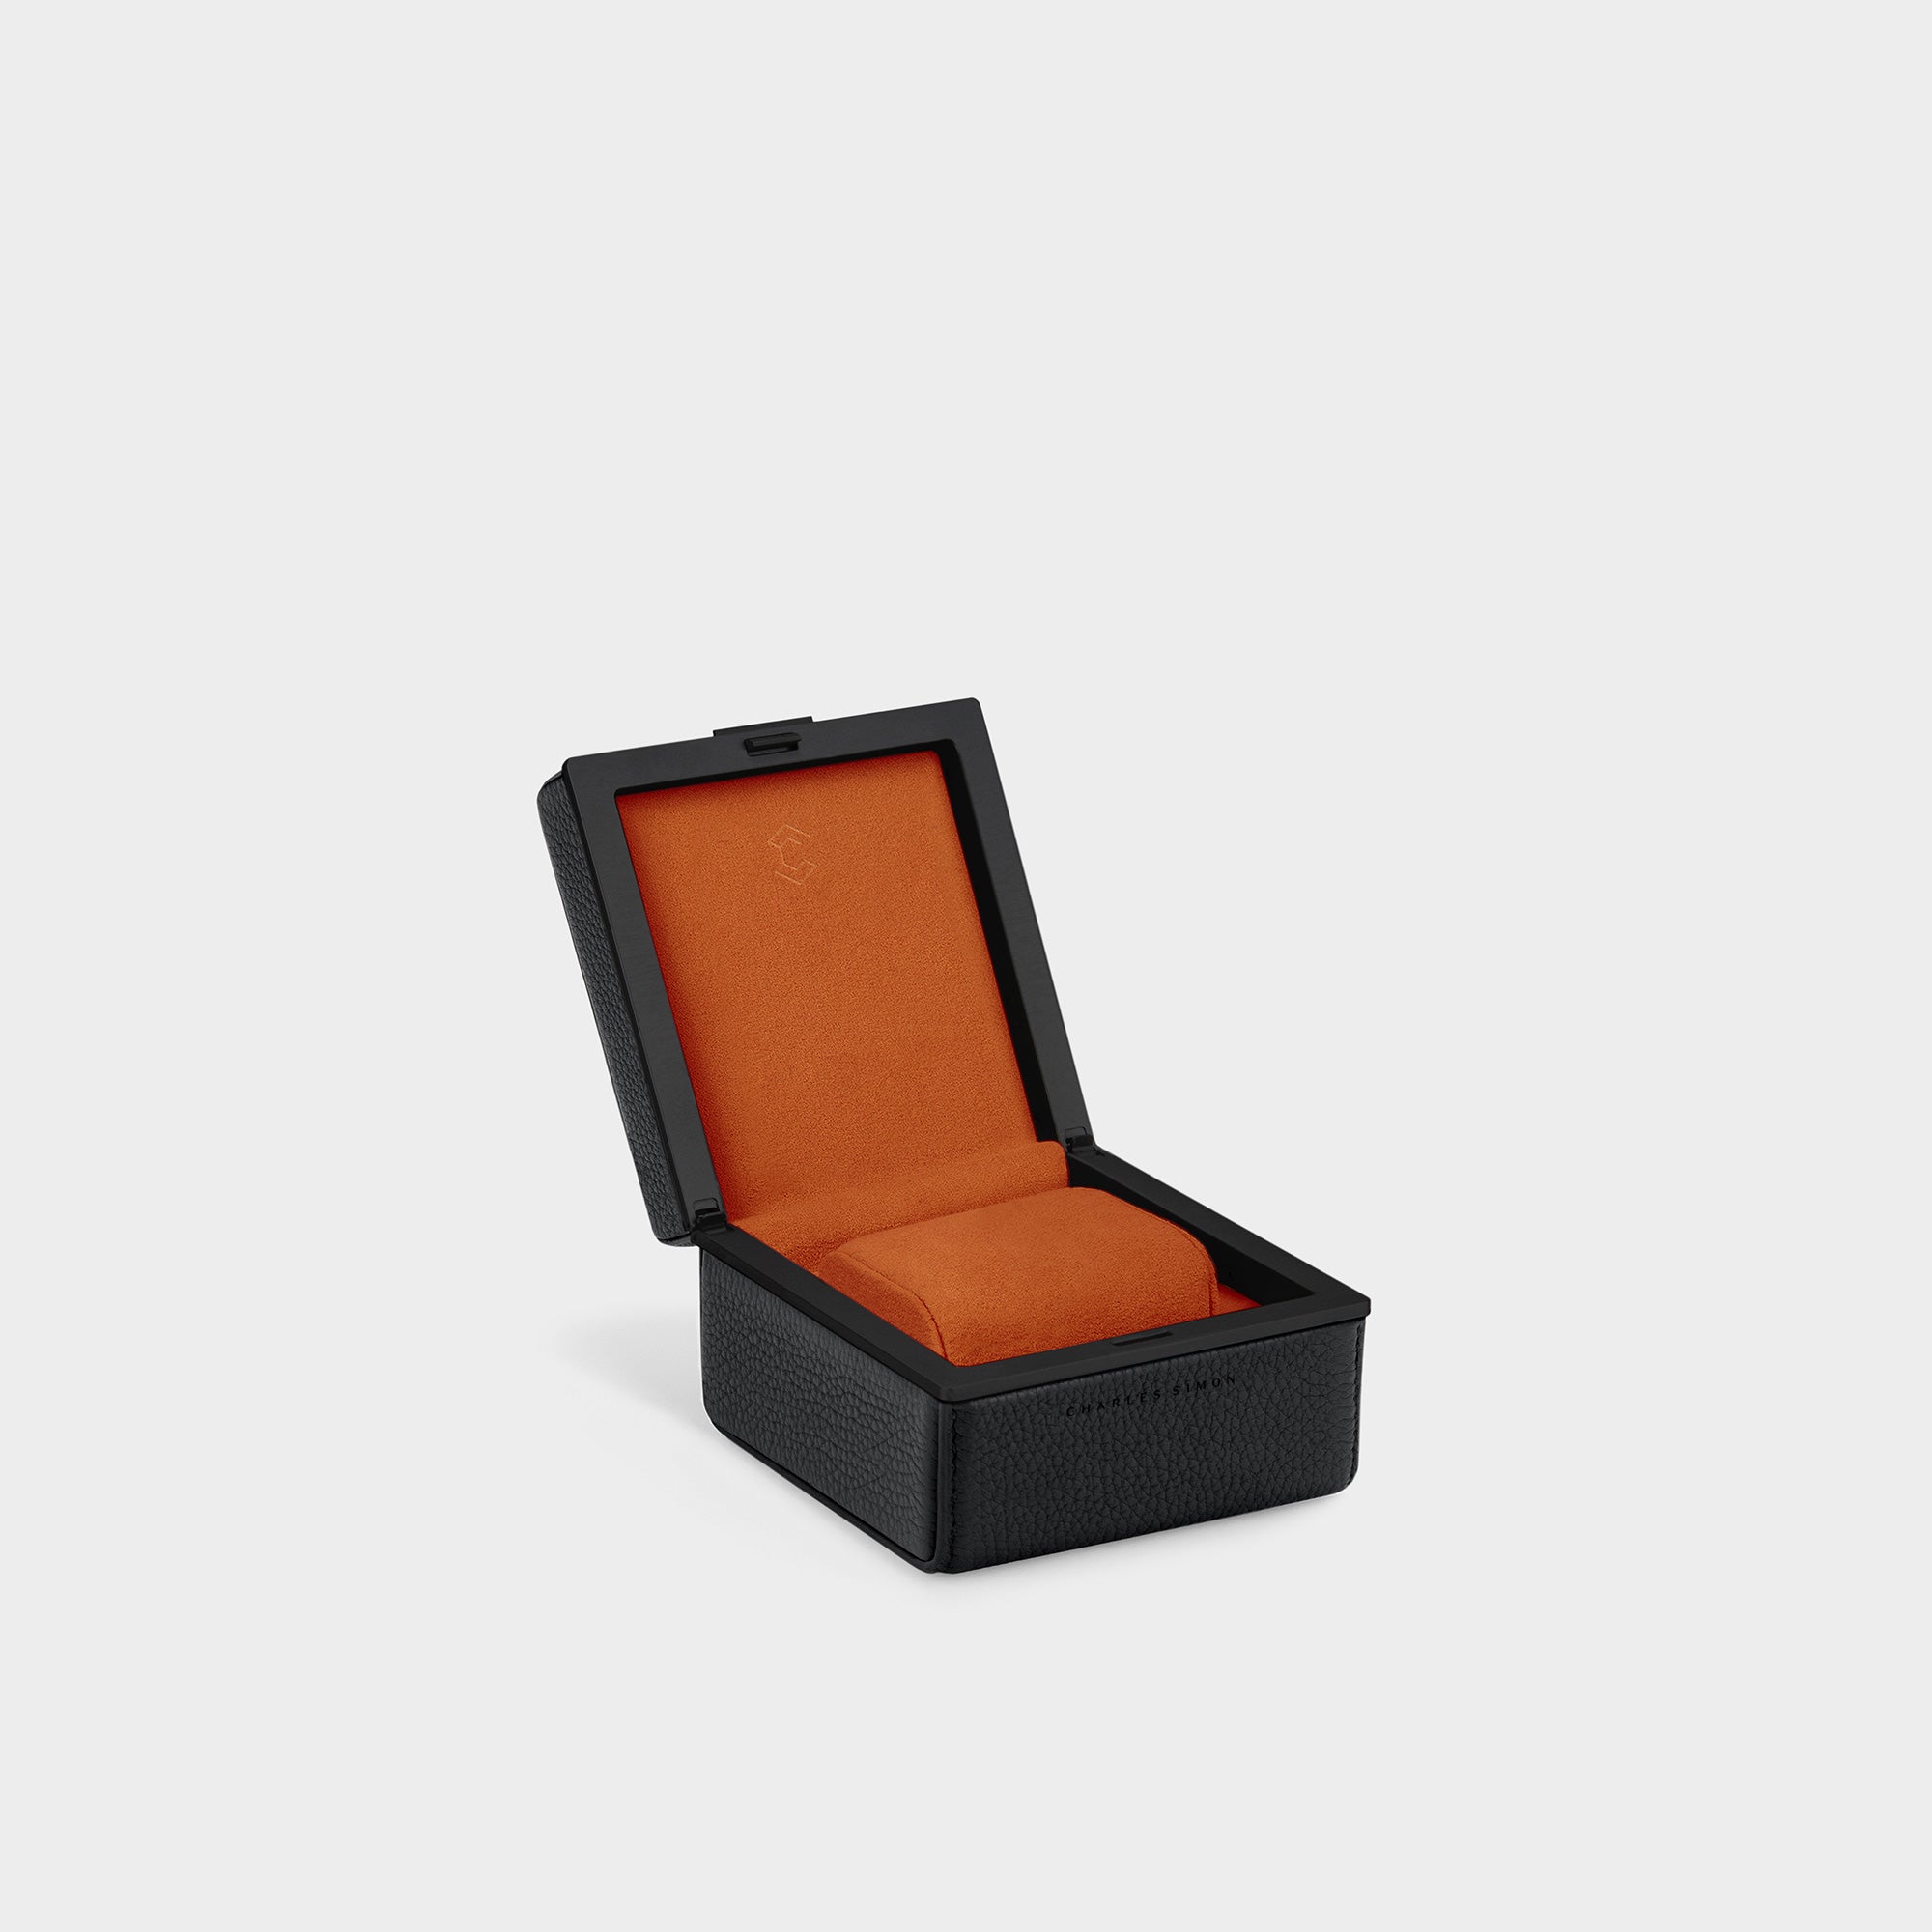 Product photo of Eaton 1 watch case for 1 watch in black leather and Papaya Alcantara interior